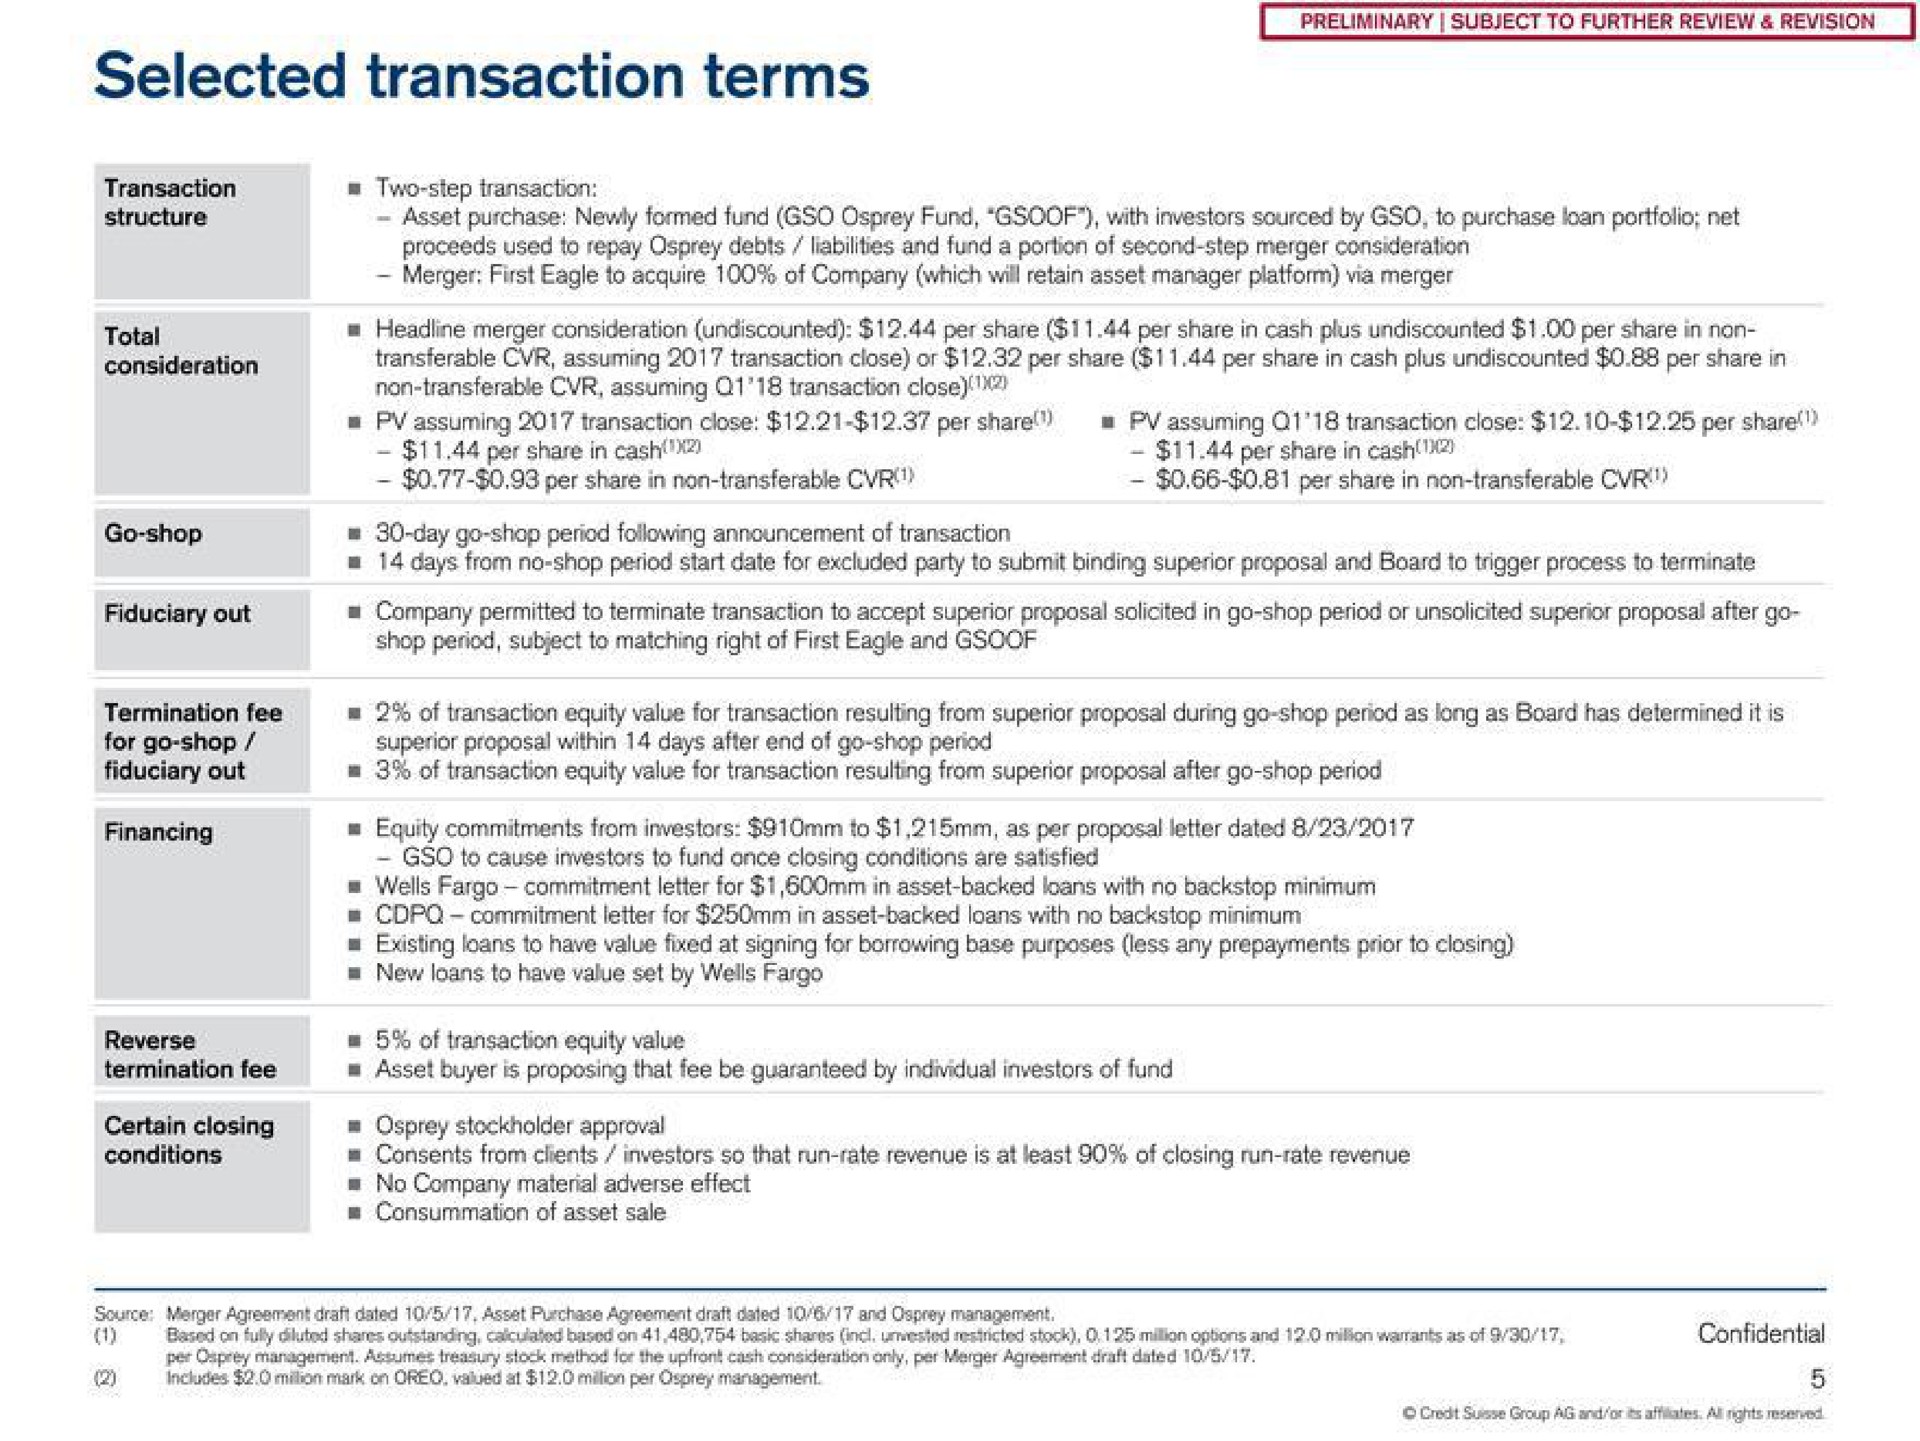 selected transaction terms | Credit Suisse